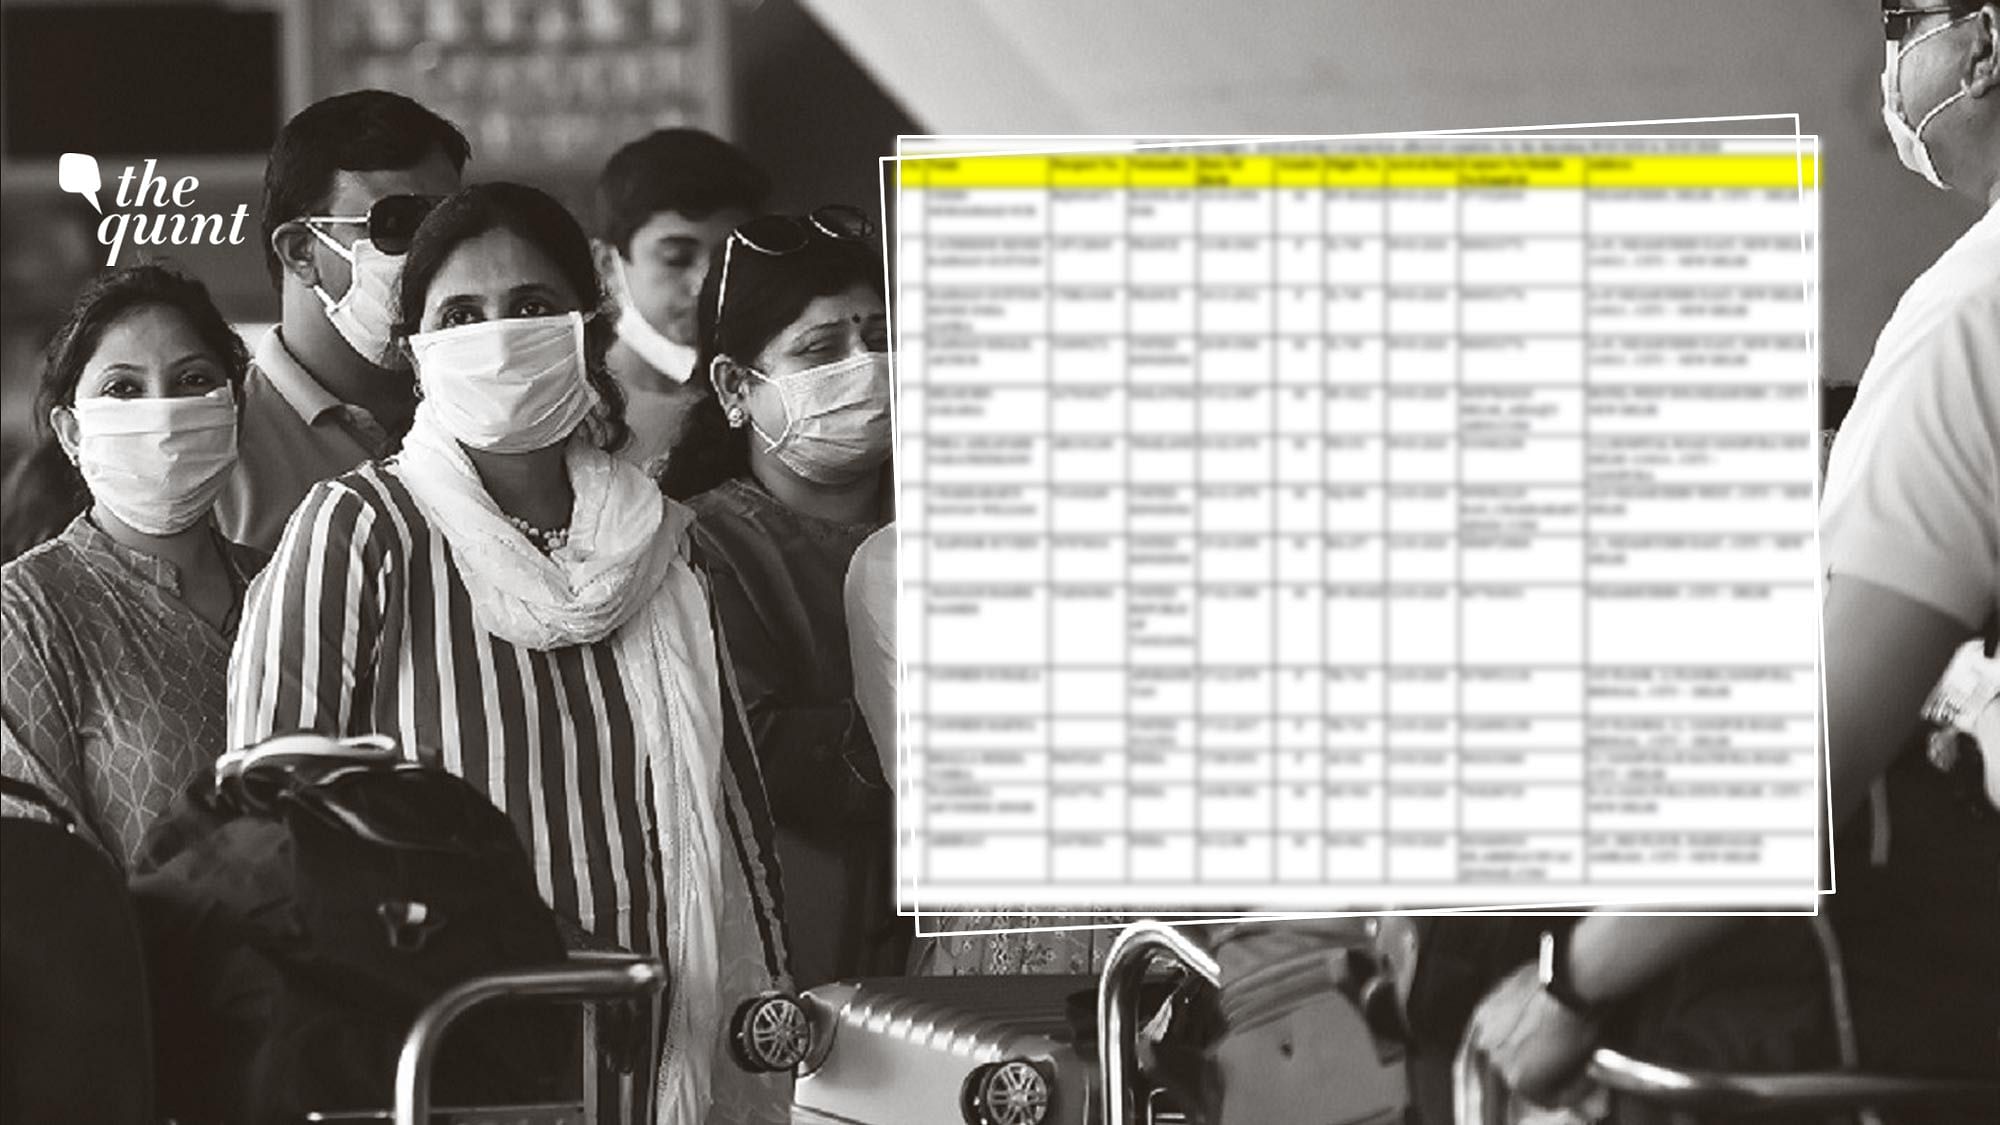 The list of south Delhi residents, which also includes minors, pertains to passengers who have arrived at Delhi’s international airport from coronavirus-affected countries between 9-20 March. 